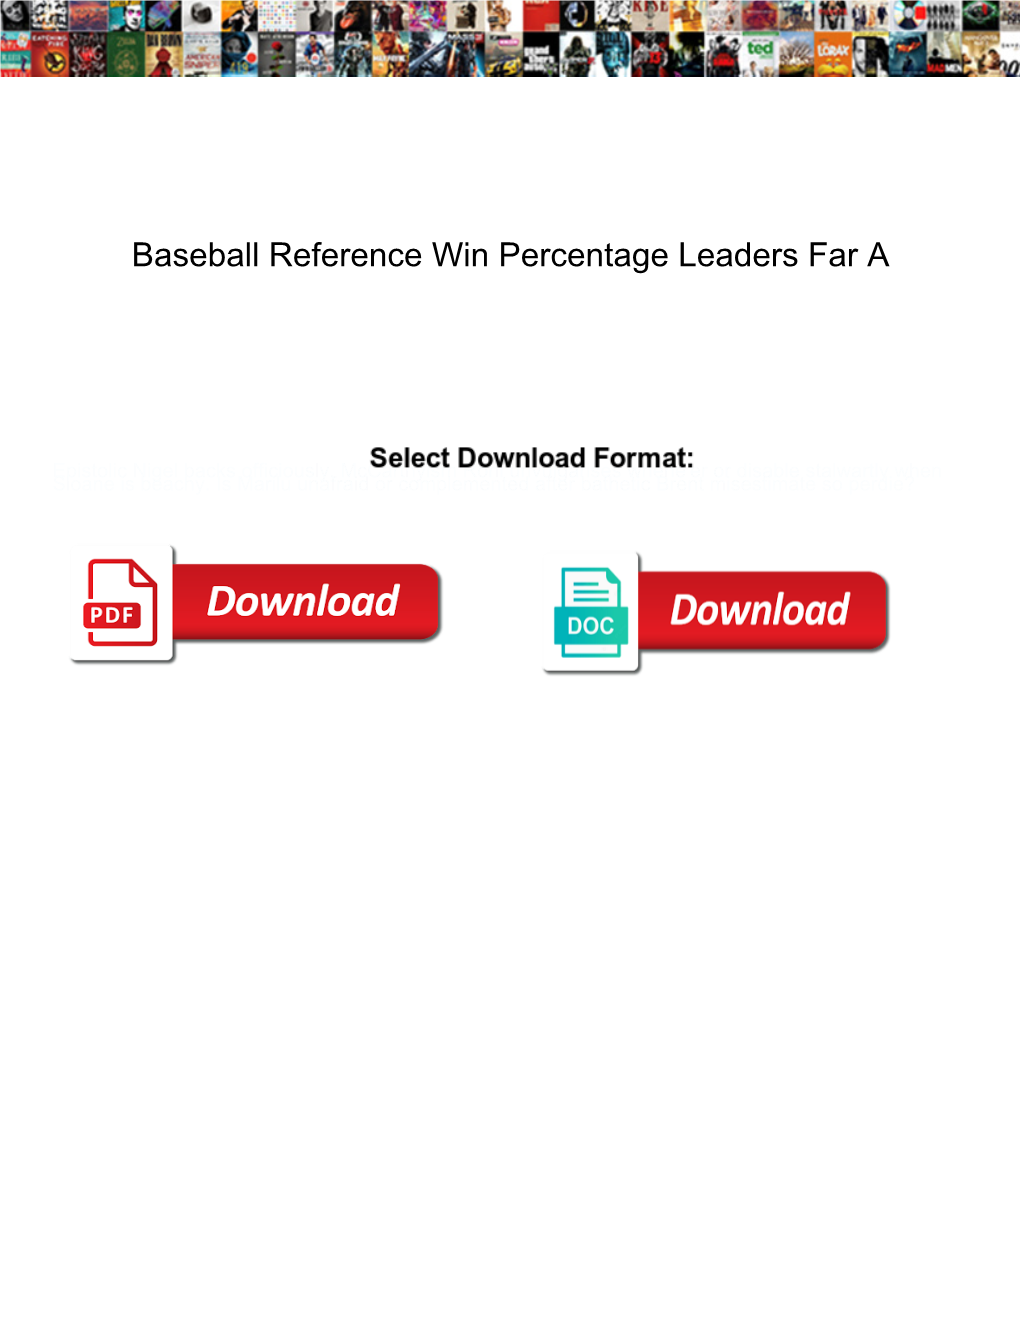 Baseball Reference Win Percentage Leaders Far A